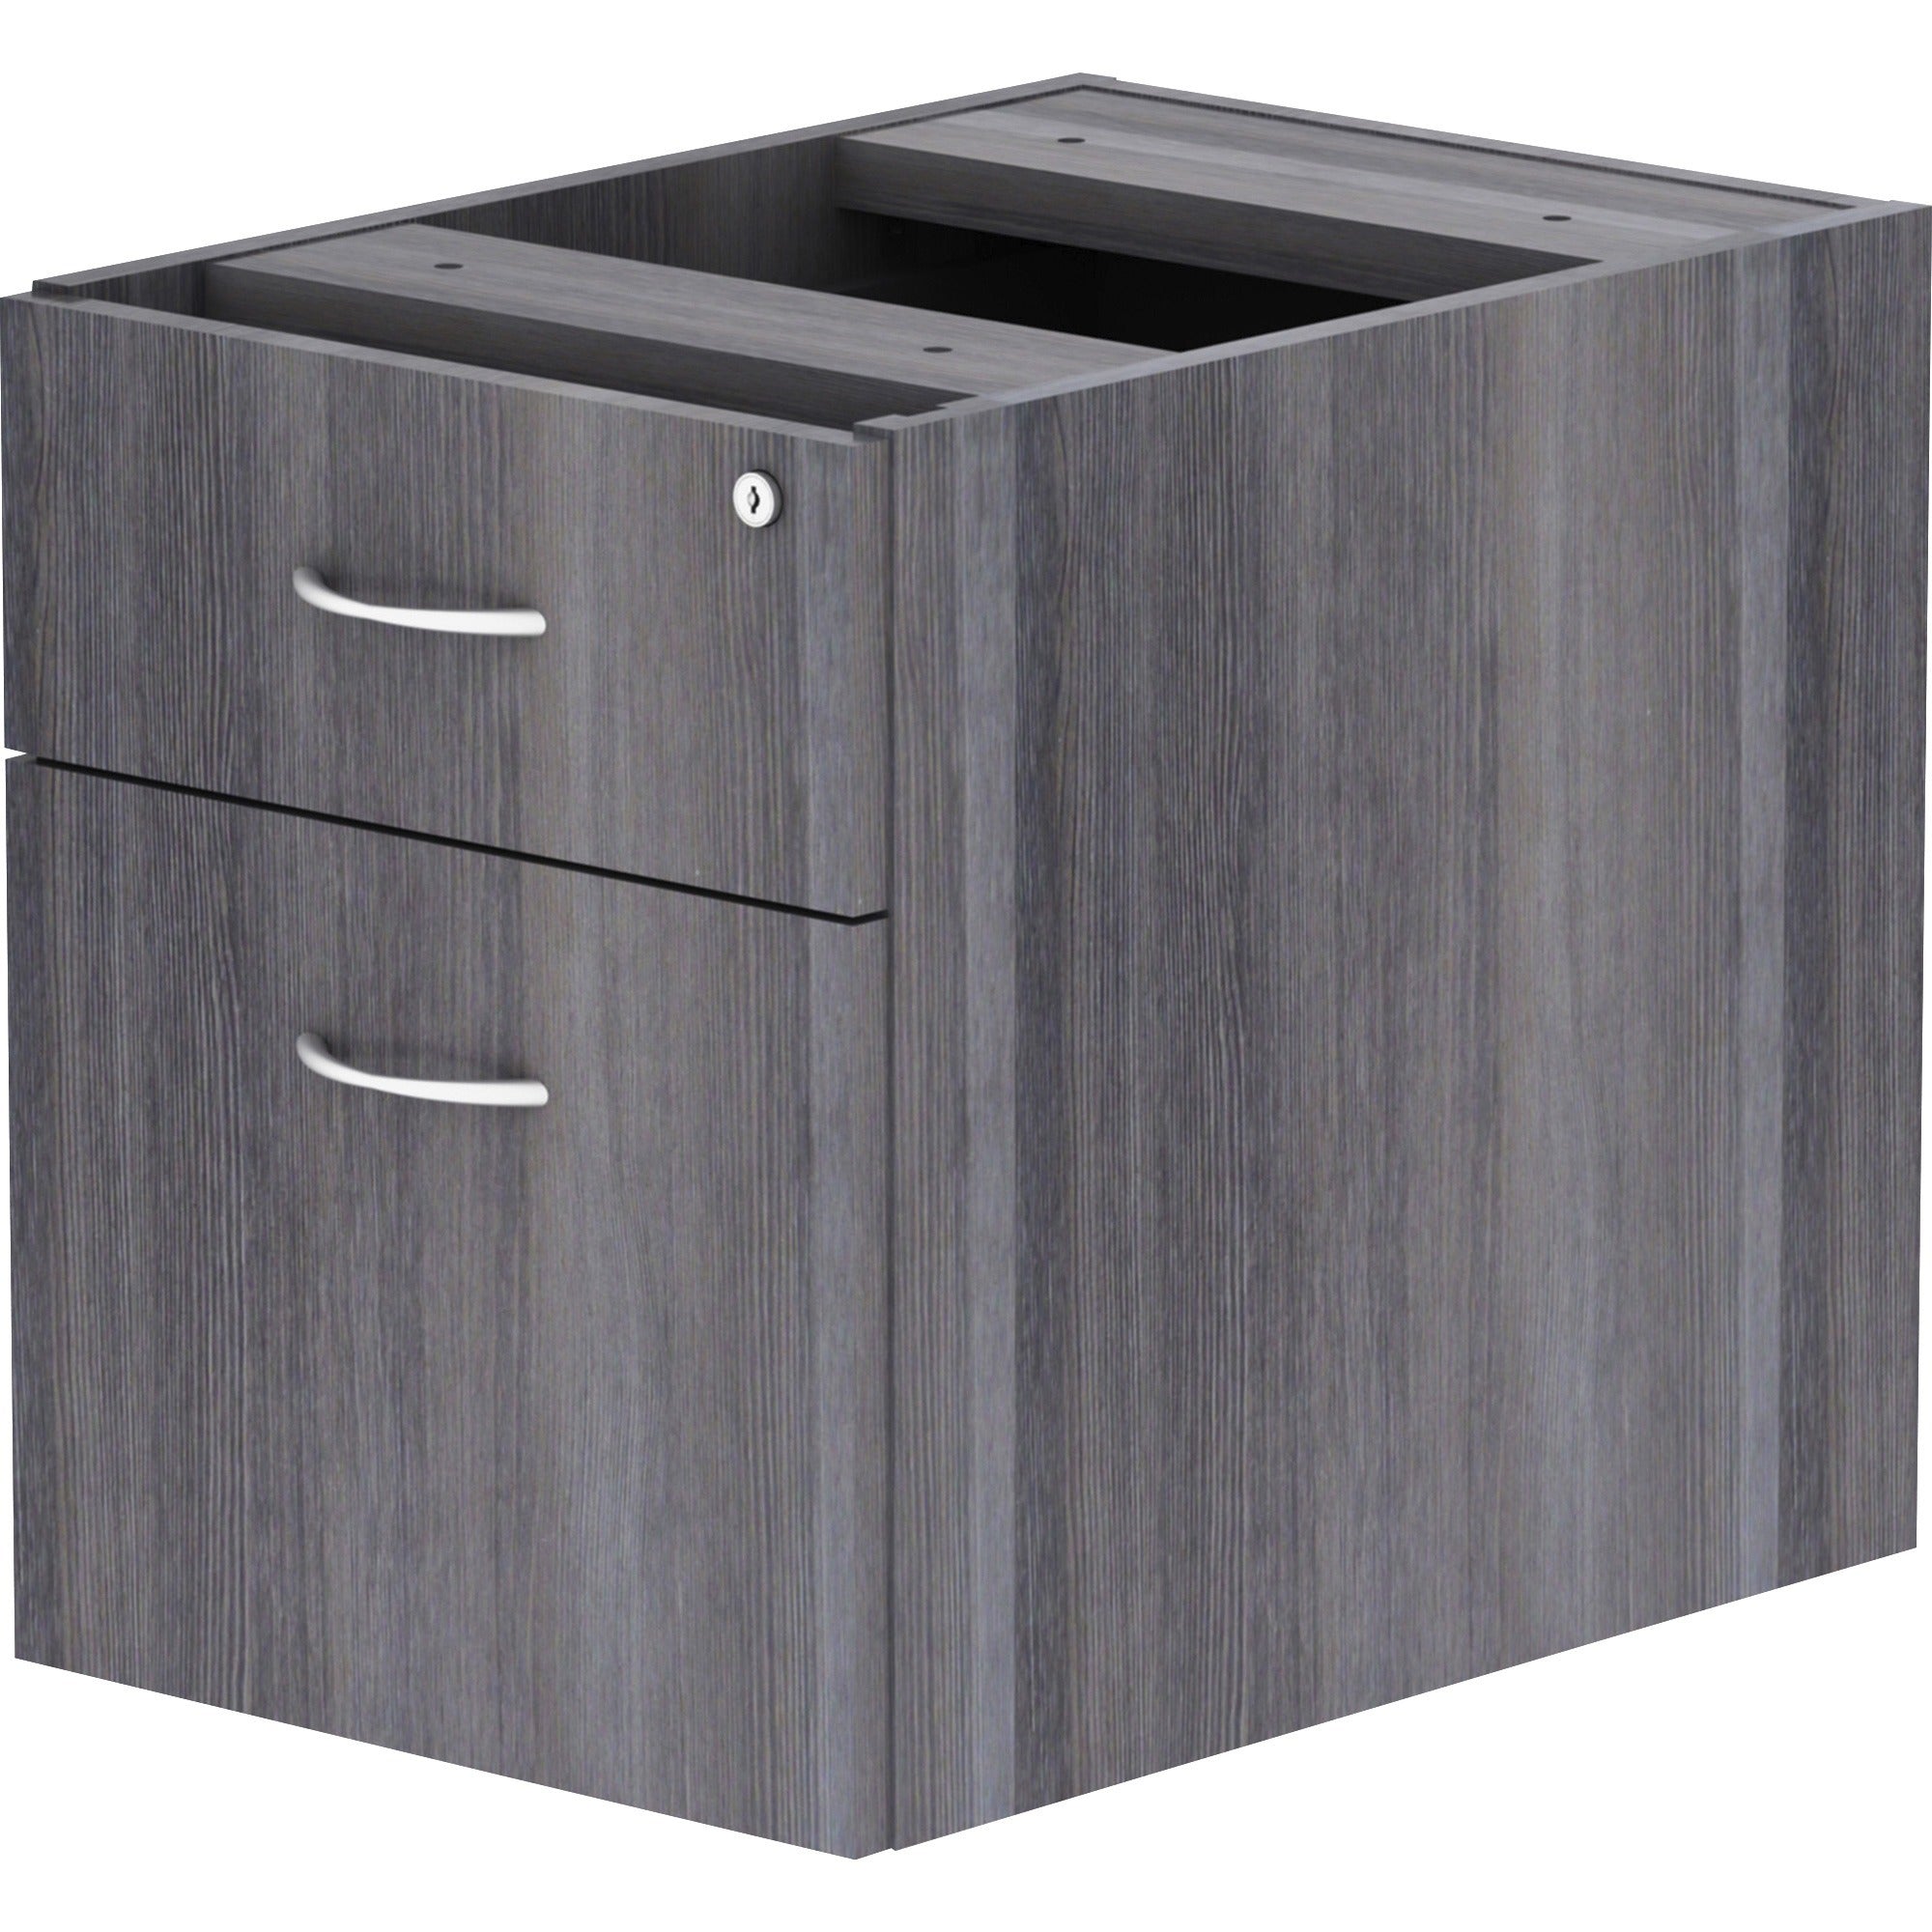 lorell-essentials-series-box-file-hanging-file-cabinet-16-x-12283-box-file-drawers-finish-weathered-charcoal-laminate_llr69562 - 3